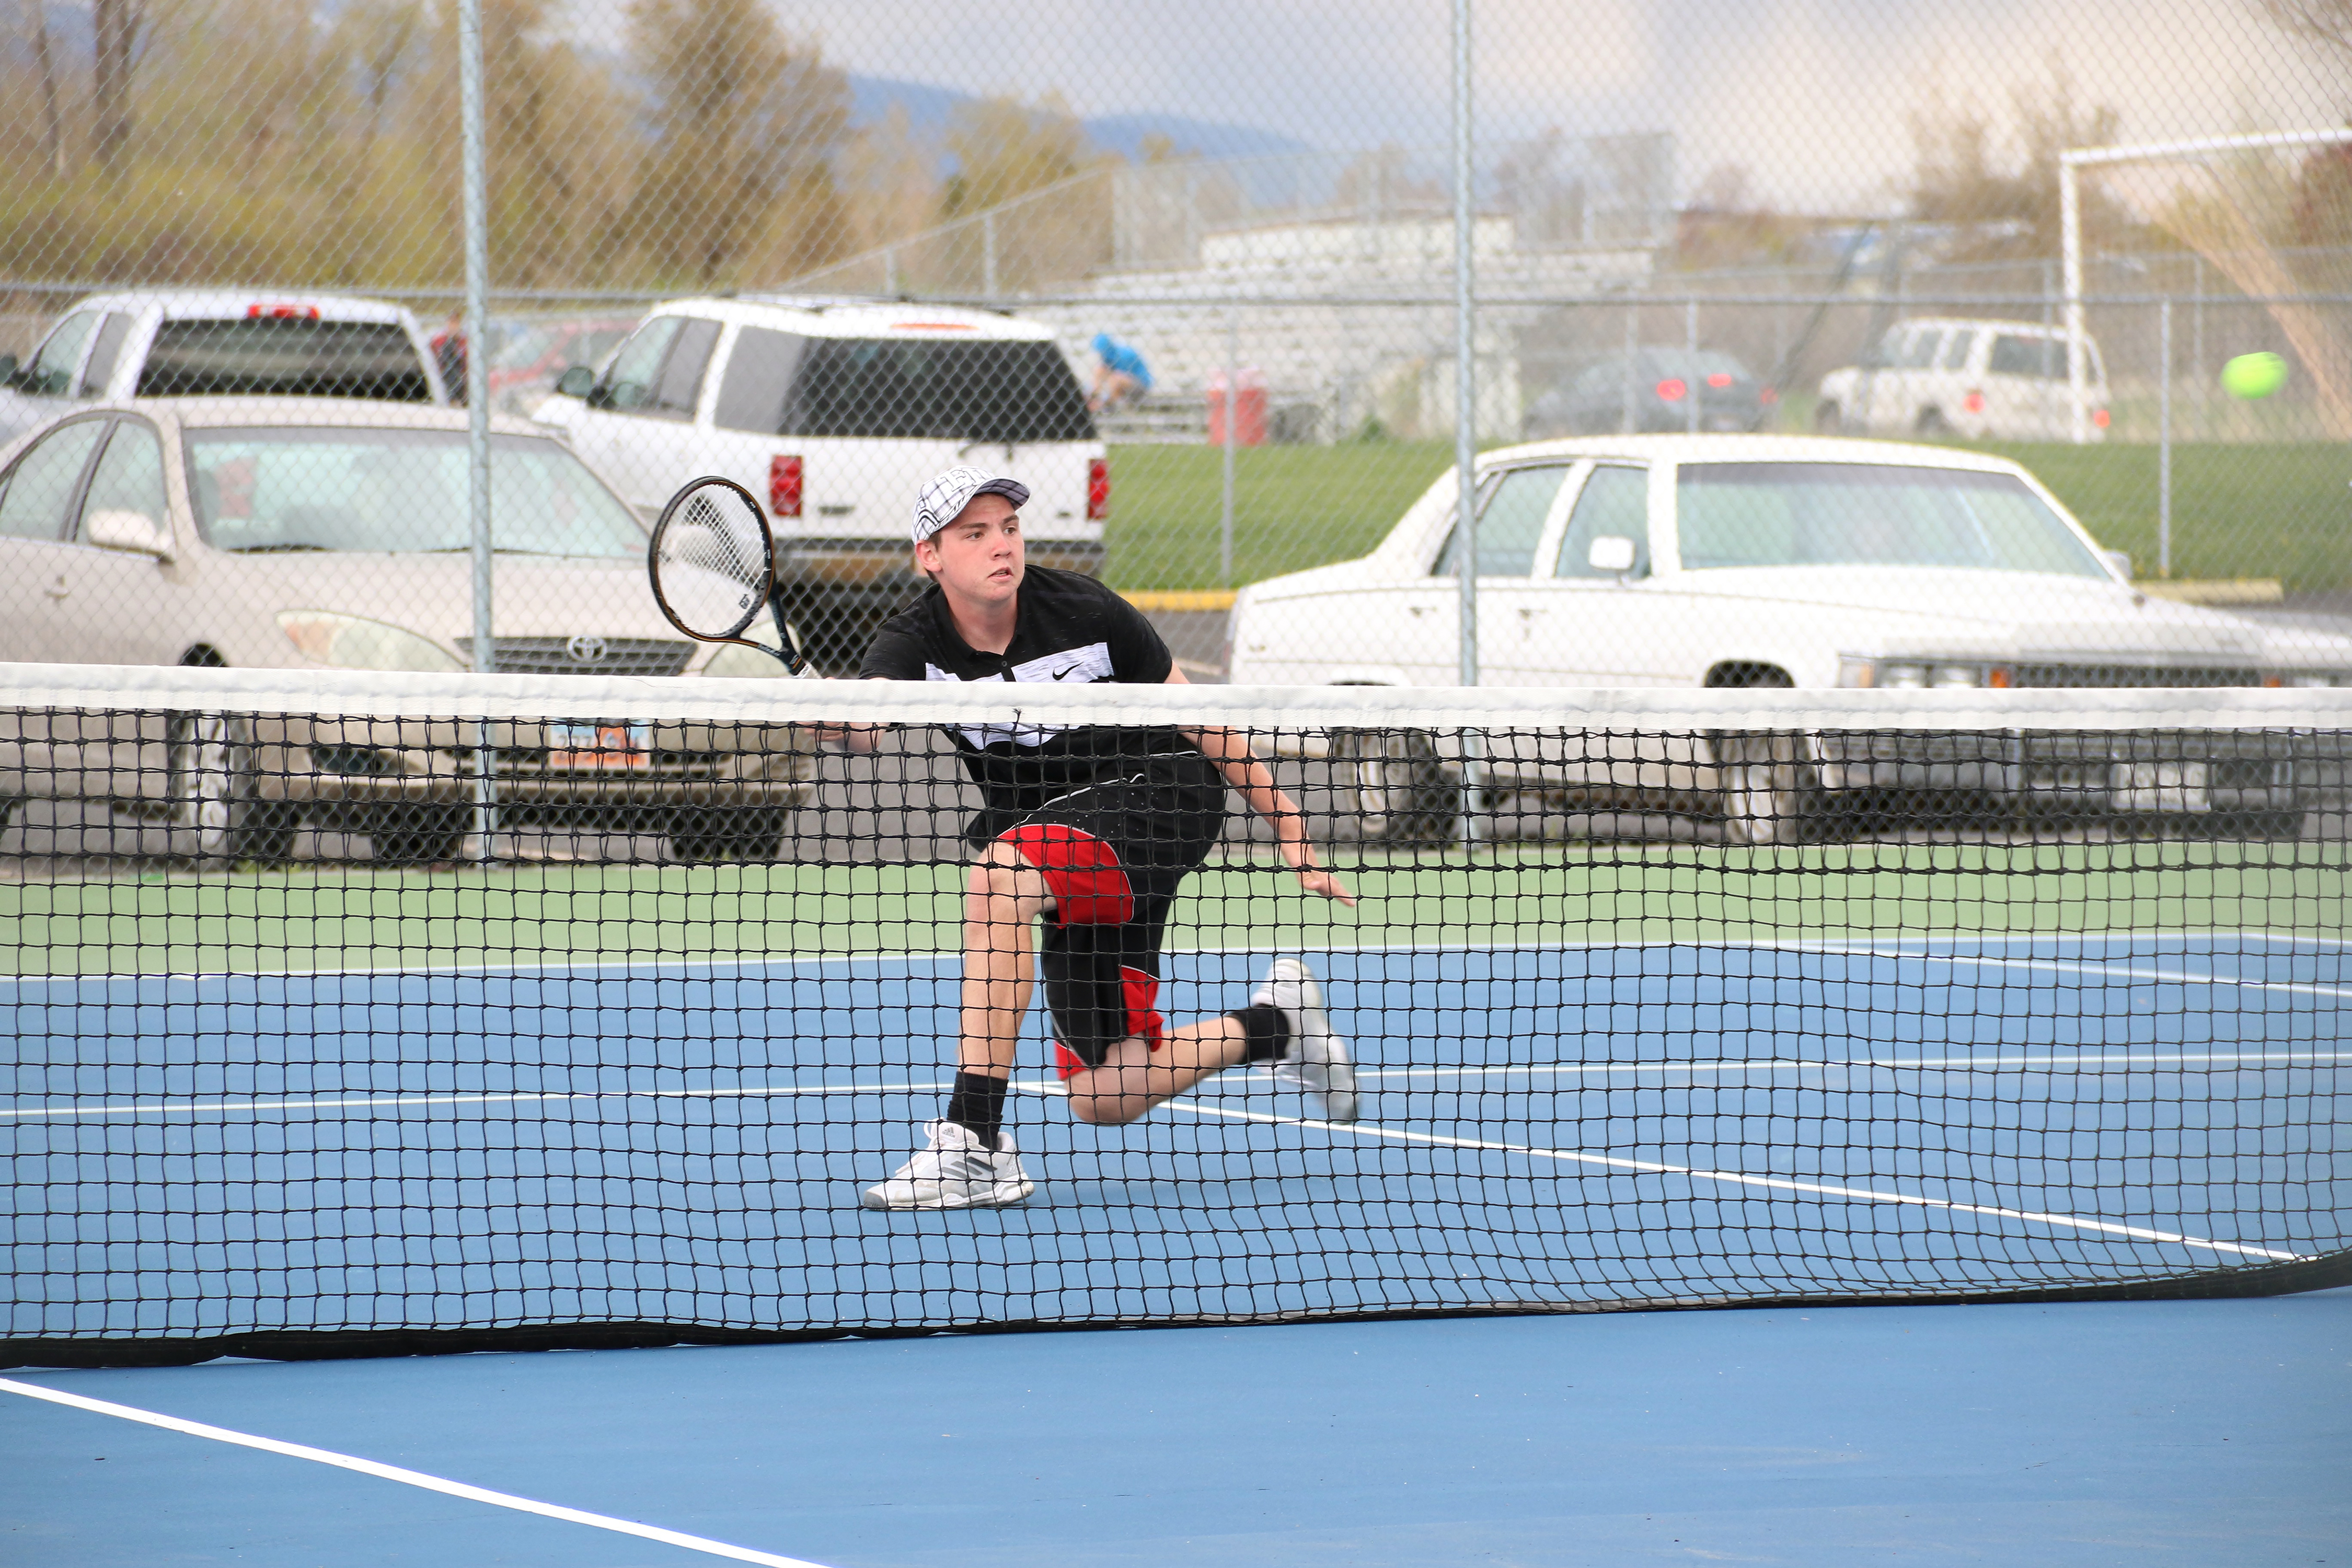 Tennis team in position to take first in region